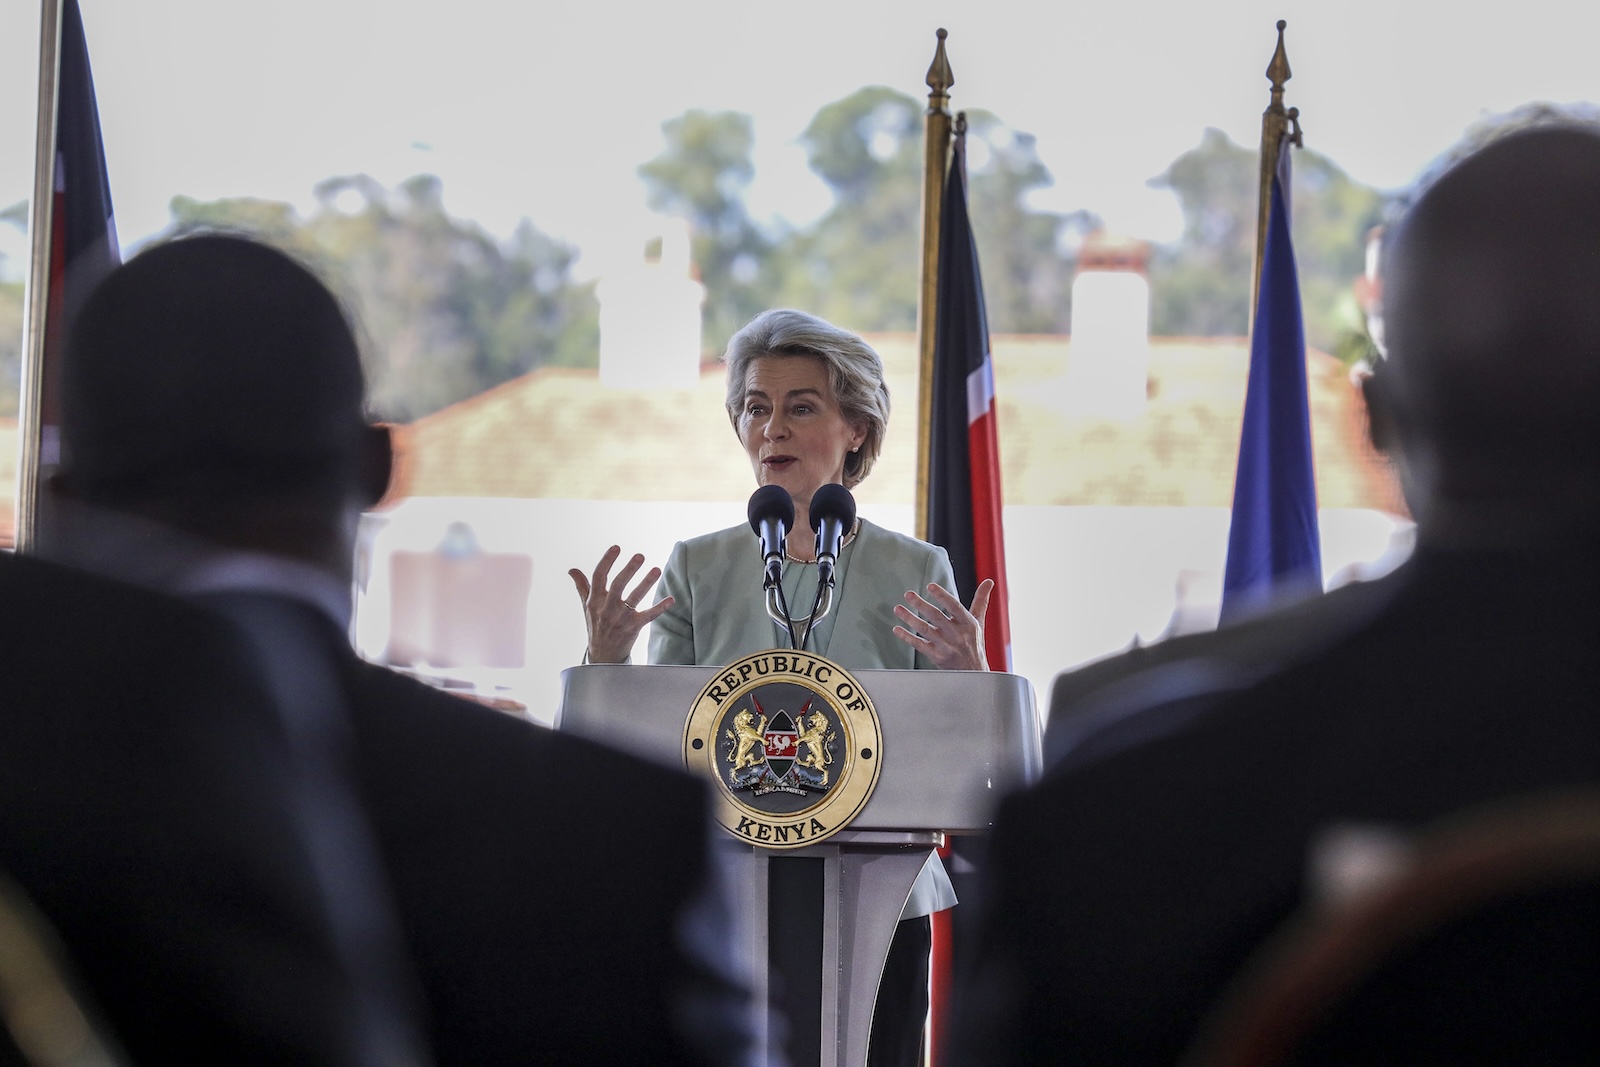 epa11035599 European Commission President Ursula von der Leyen speaks during a joint press conference at the signing of the Kenya-EU Economic Partnership Agreement at the Statehouse in Nairobi, Kenya, 18 December 2023. The EU and Kenya signed an Economic Partnership Agreement (EPA) to boost bilateral trade in goods, increase investment flows, and contribute to sustainable economic growth, according to a statement by the delegation of the EU to Kenya. The EU is Kenya's first export destination and second largest trading partner, with a total of 3.3 billion euros in bilateral trade in 2022, which represents an increase of 27 percent compared to 2018.  EPA/DANIEL IRUNGU